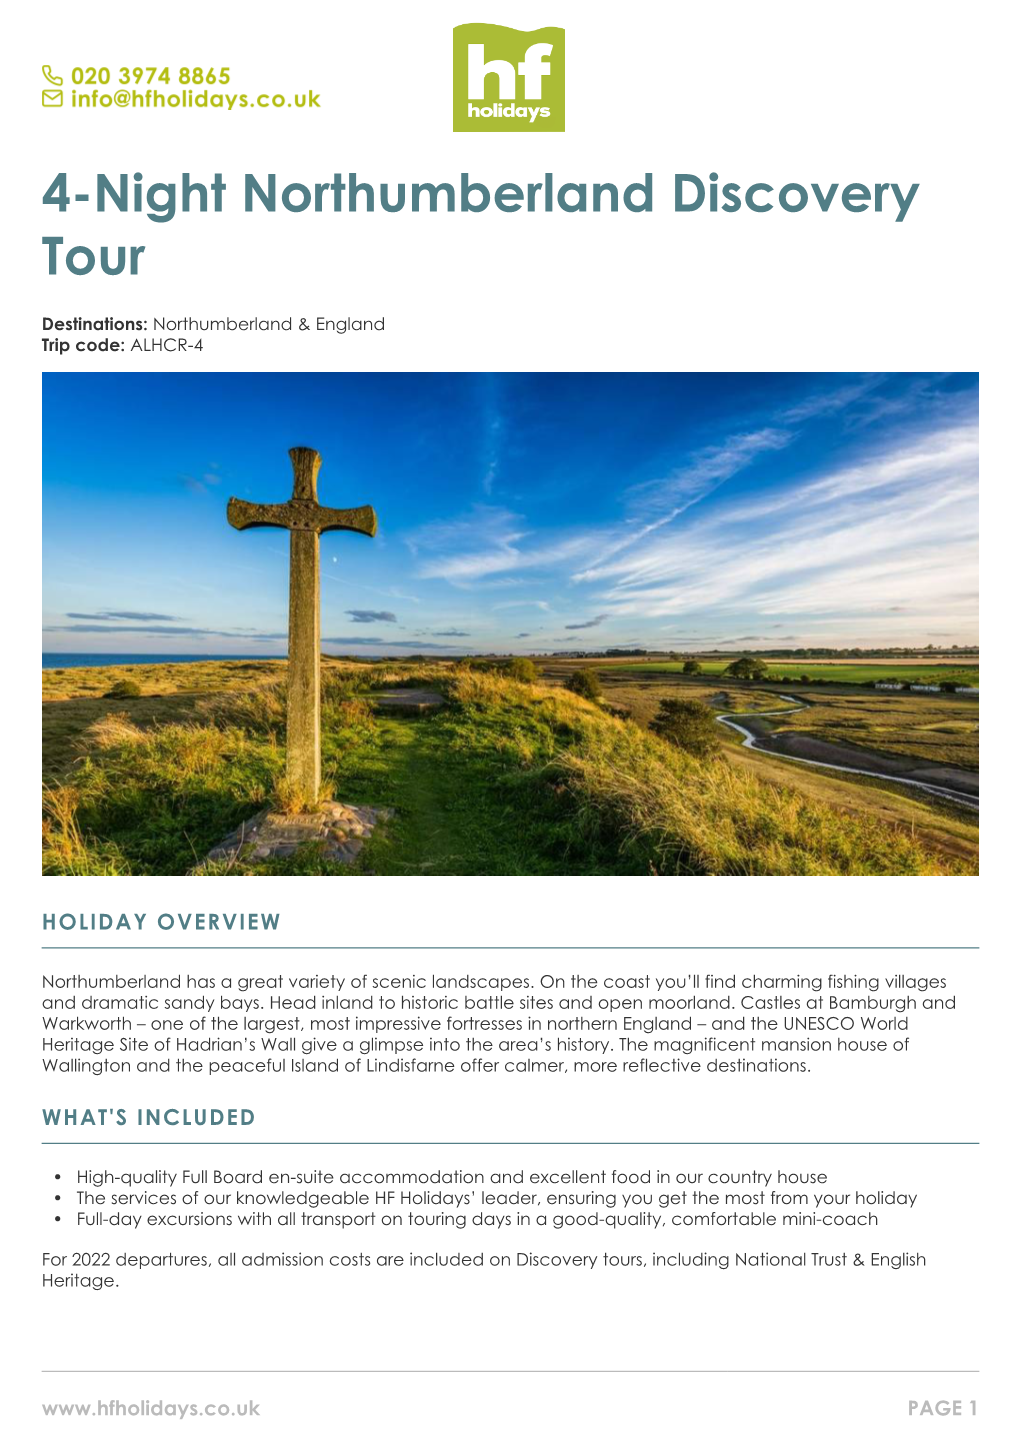 4-Night Northumberland Discovery Tour